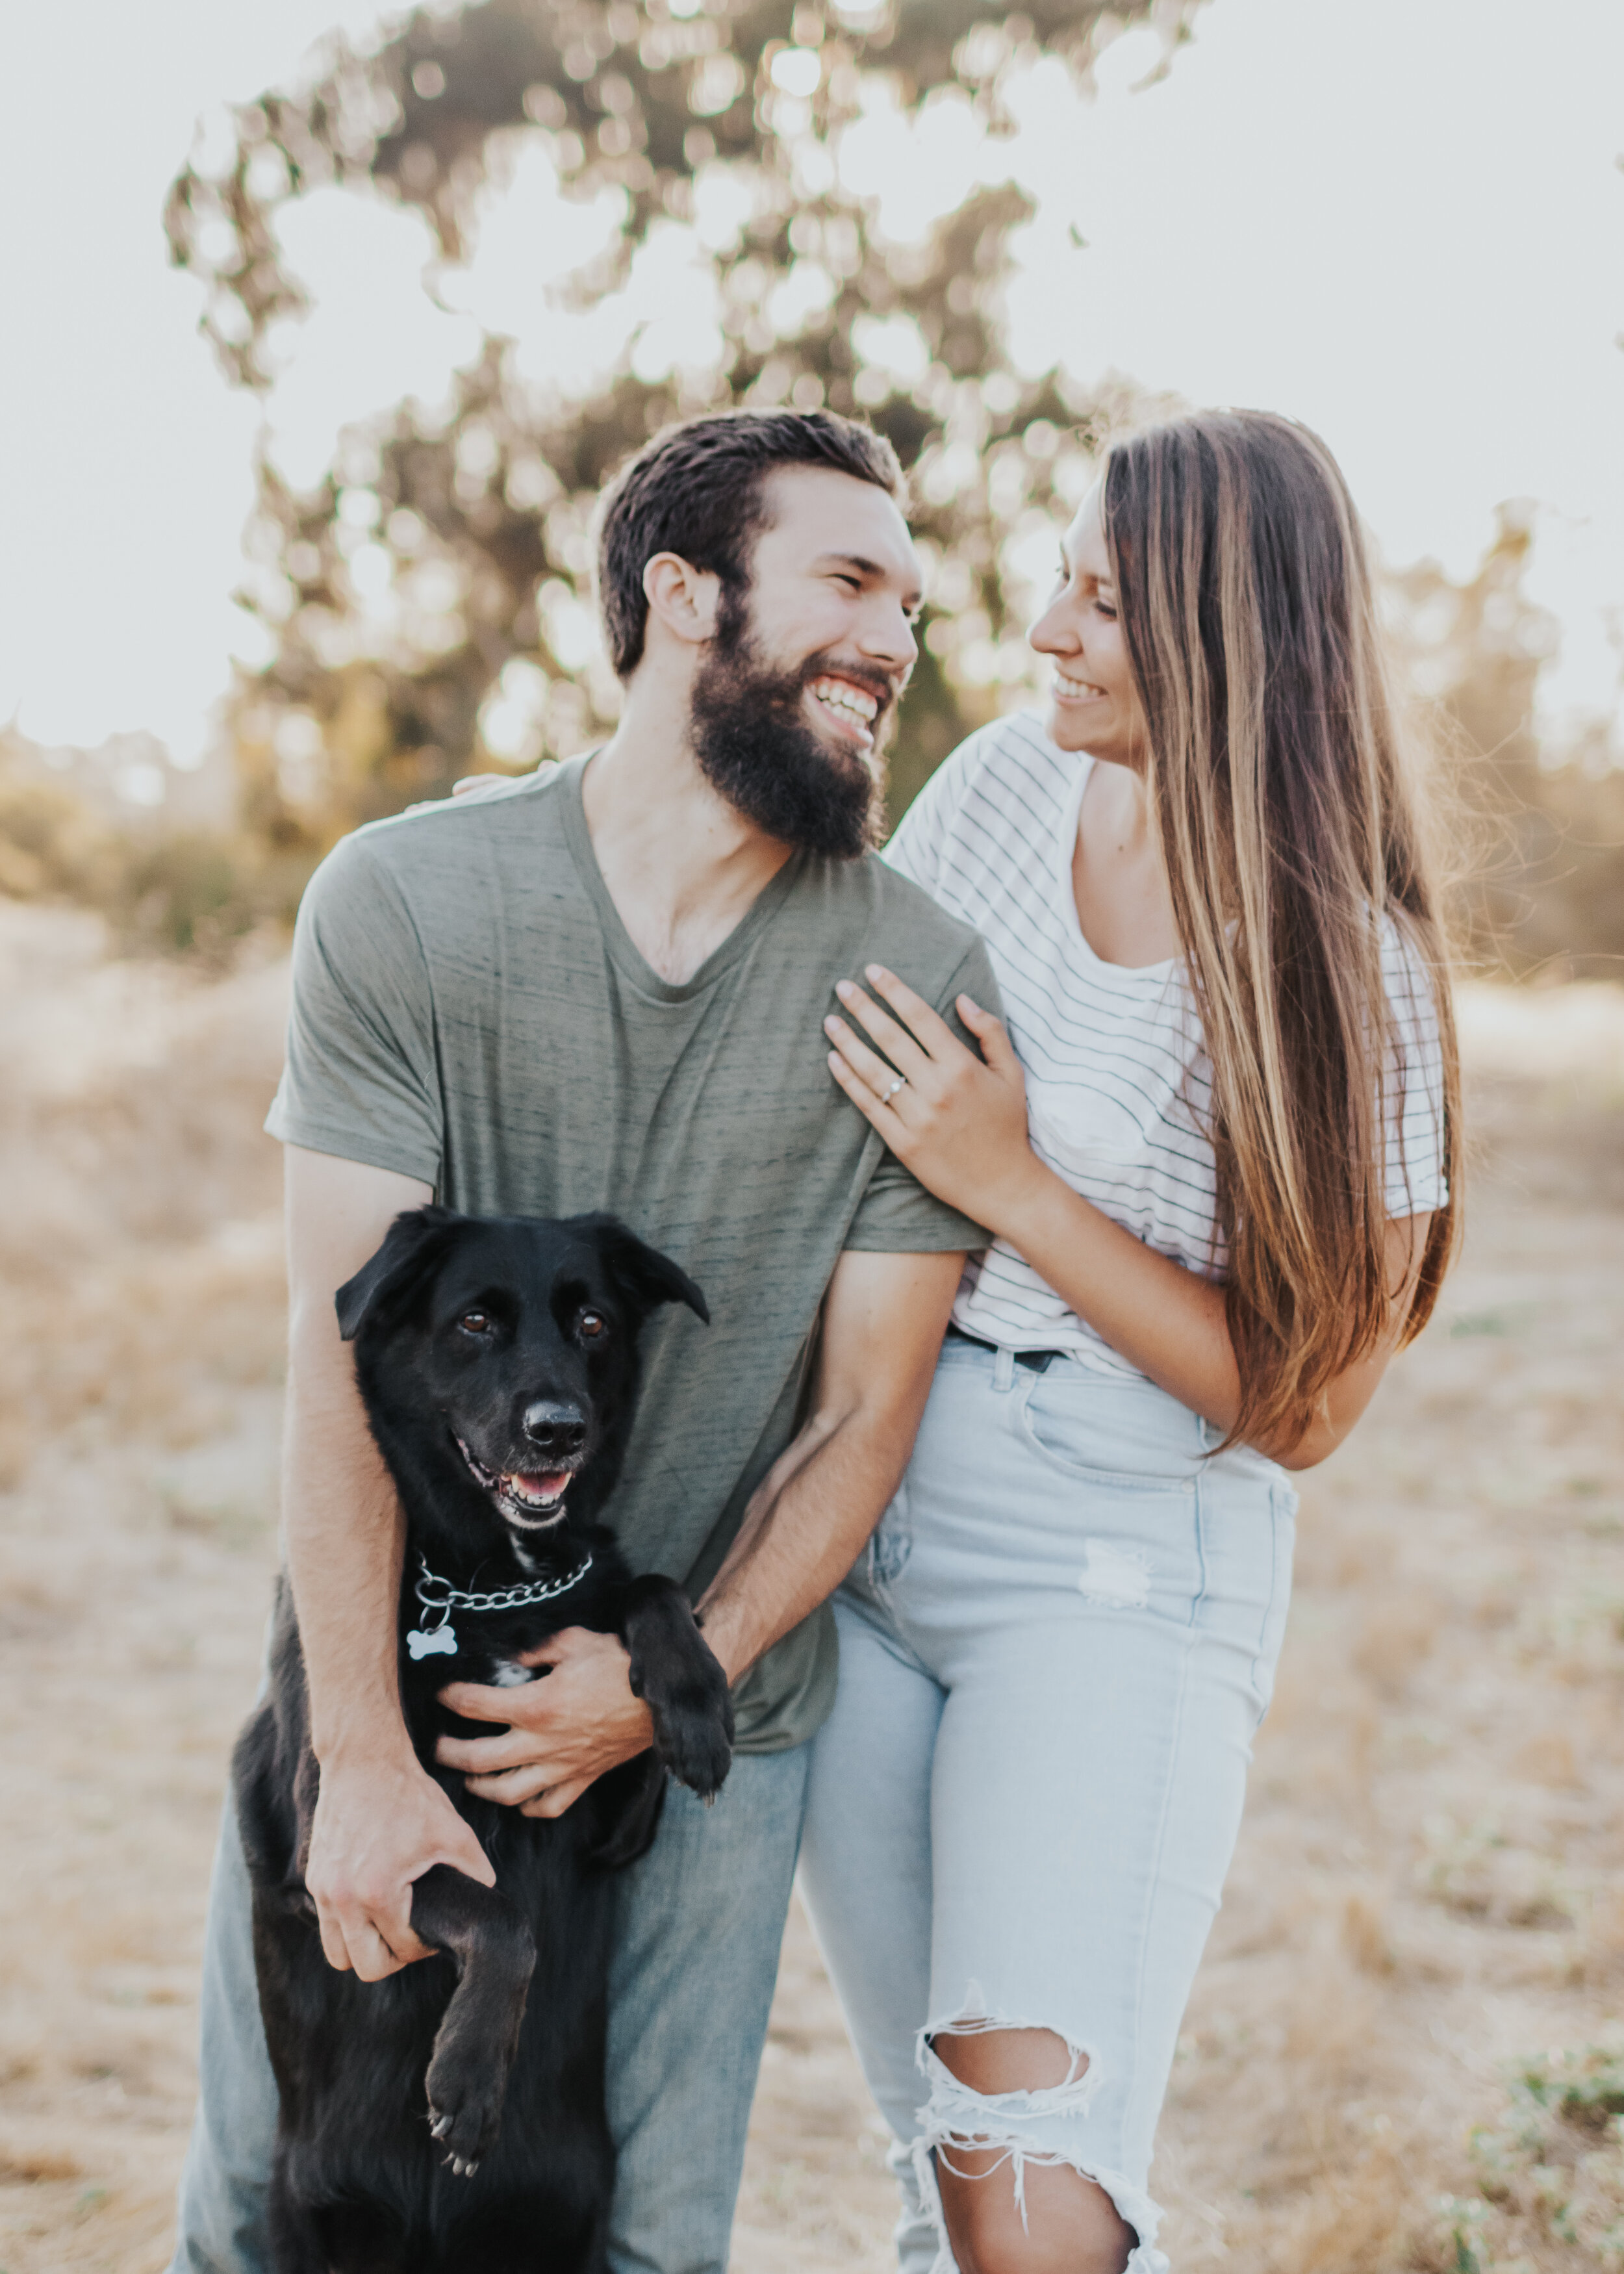 Engaged couple embracing each other and their dog.